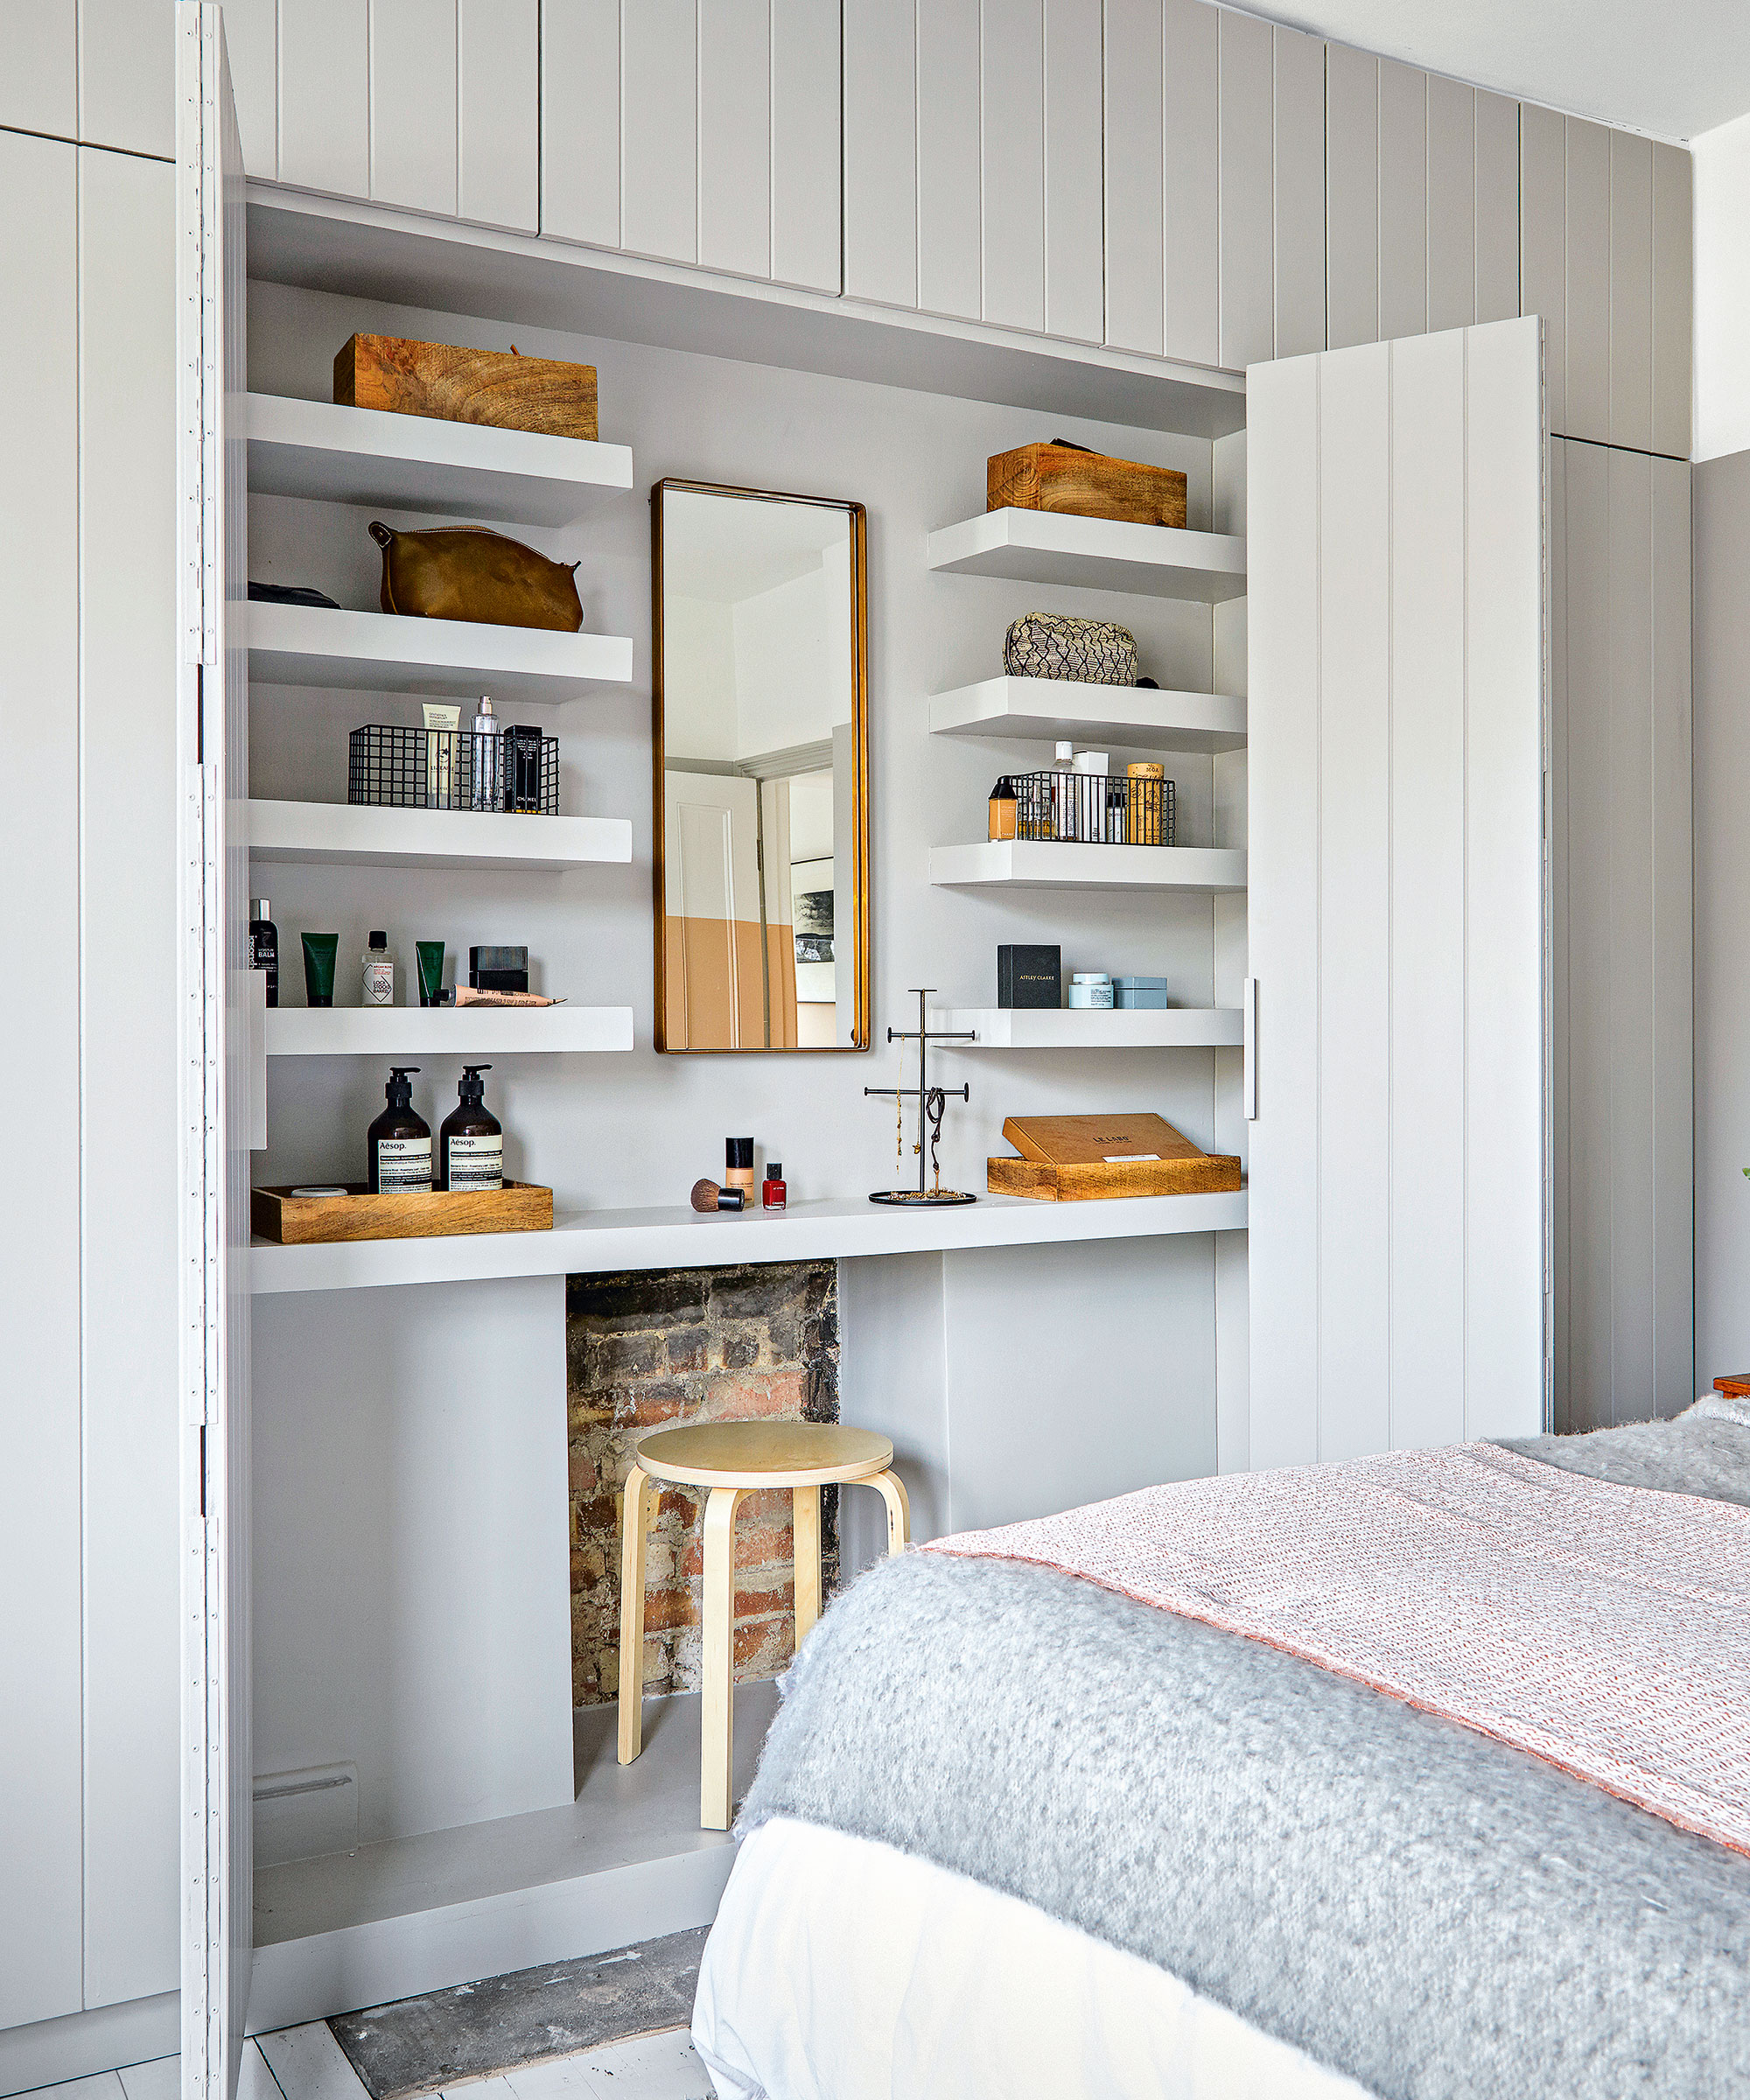 A main bedroom with built in shelving and a dressing area with a small wooden stool